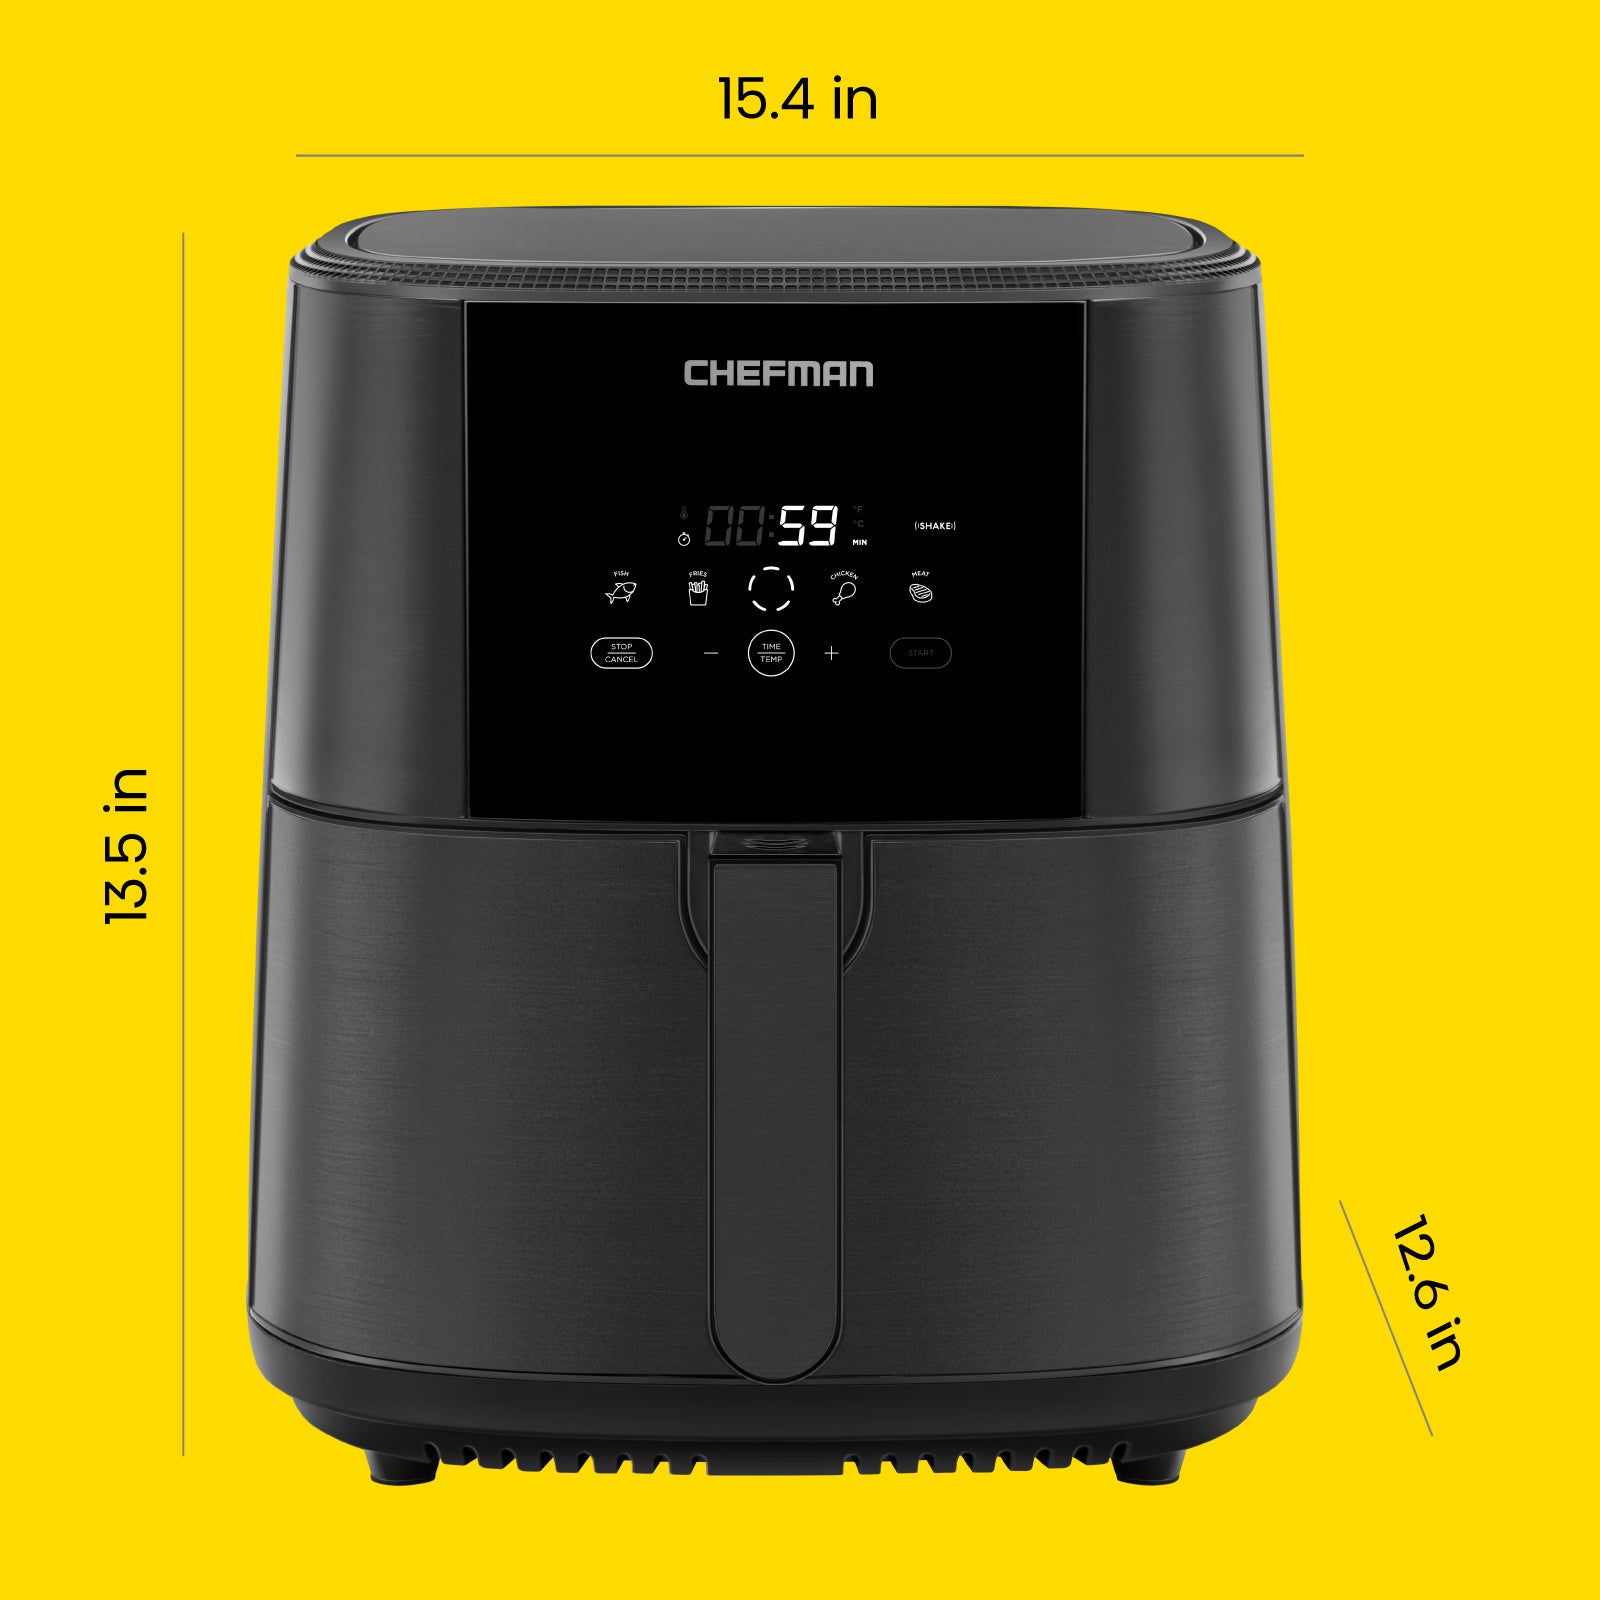 Chefman TurboTouch Air Fryer, One-Touch Digital Control, Shake